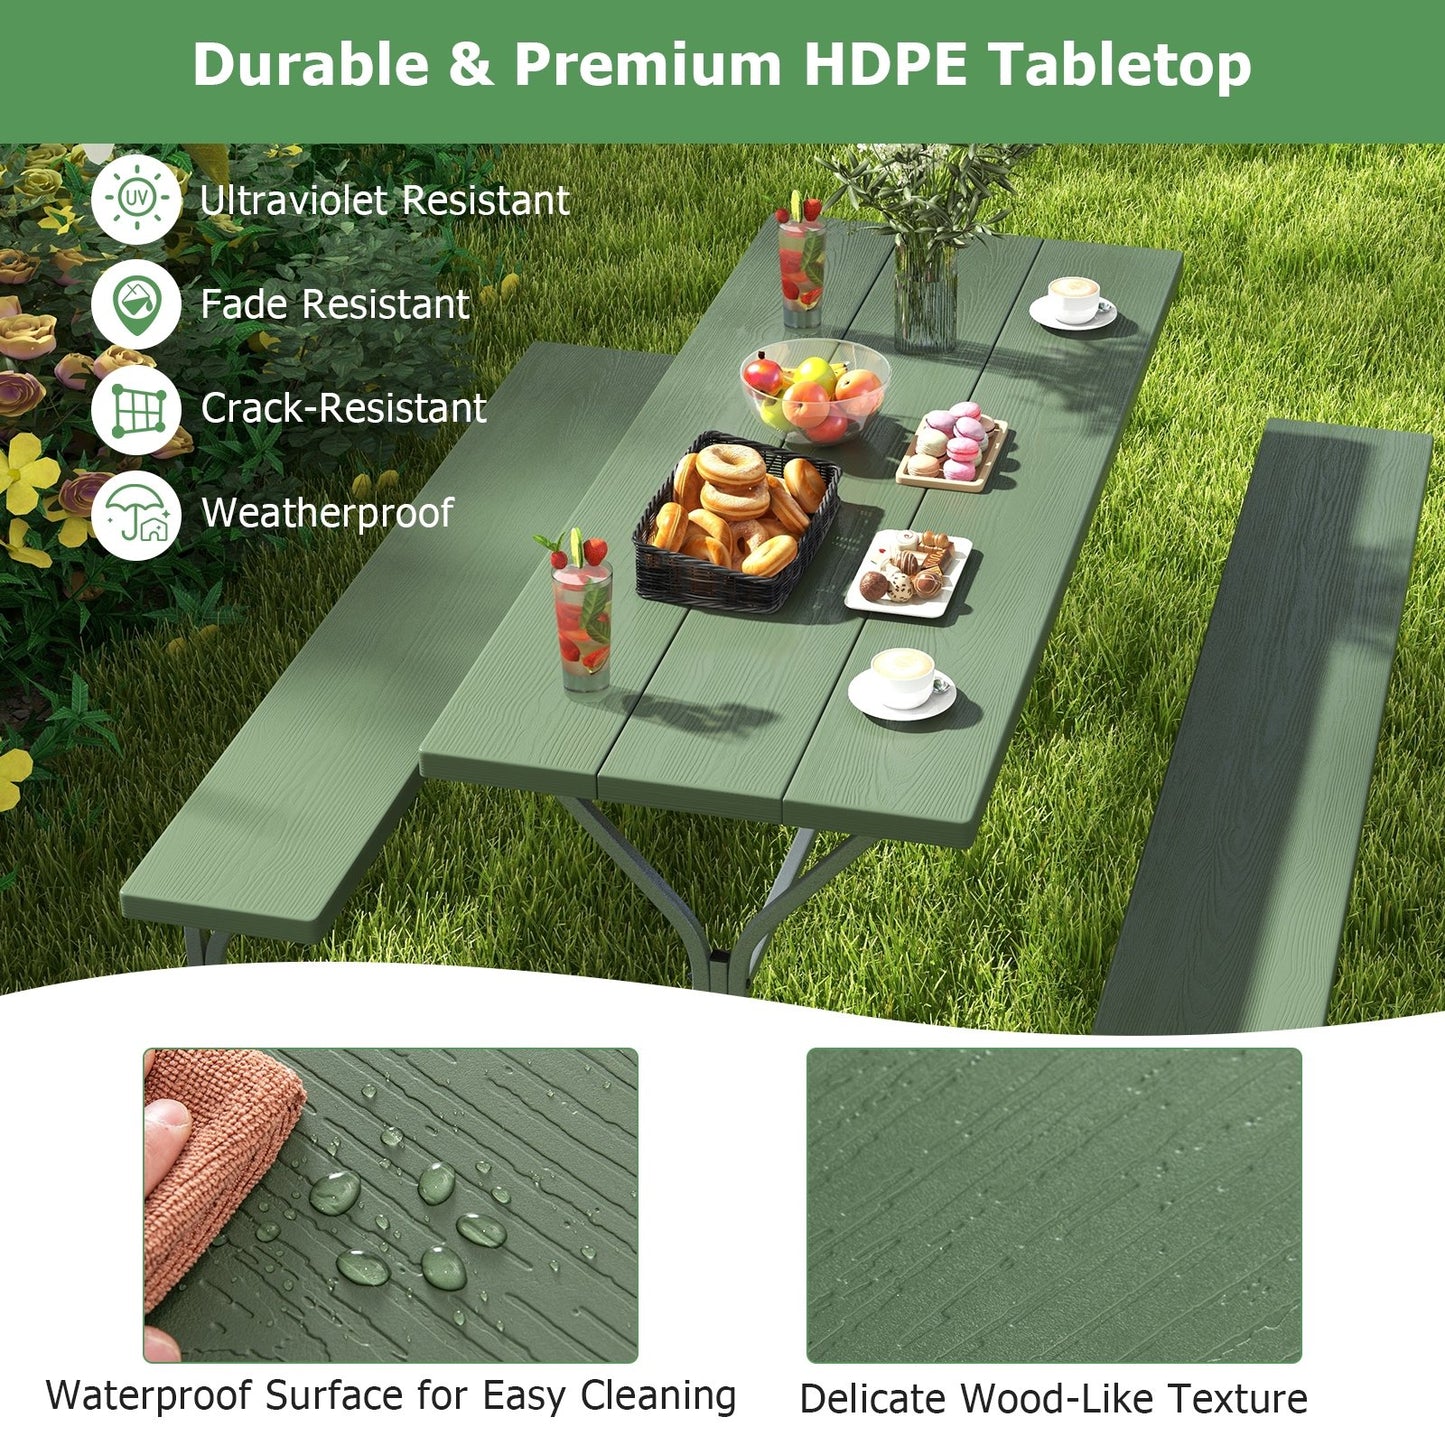 6 FT Picnic Table Bench Set Dining Table and 2 Benches with Metal Frame and HDPE Tabletop, Green